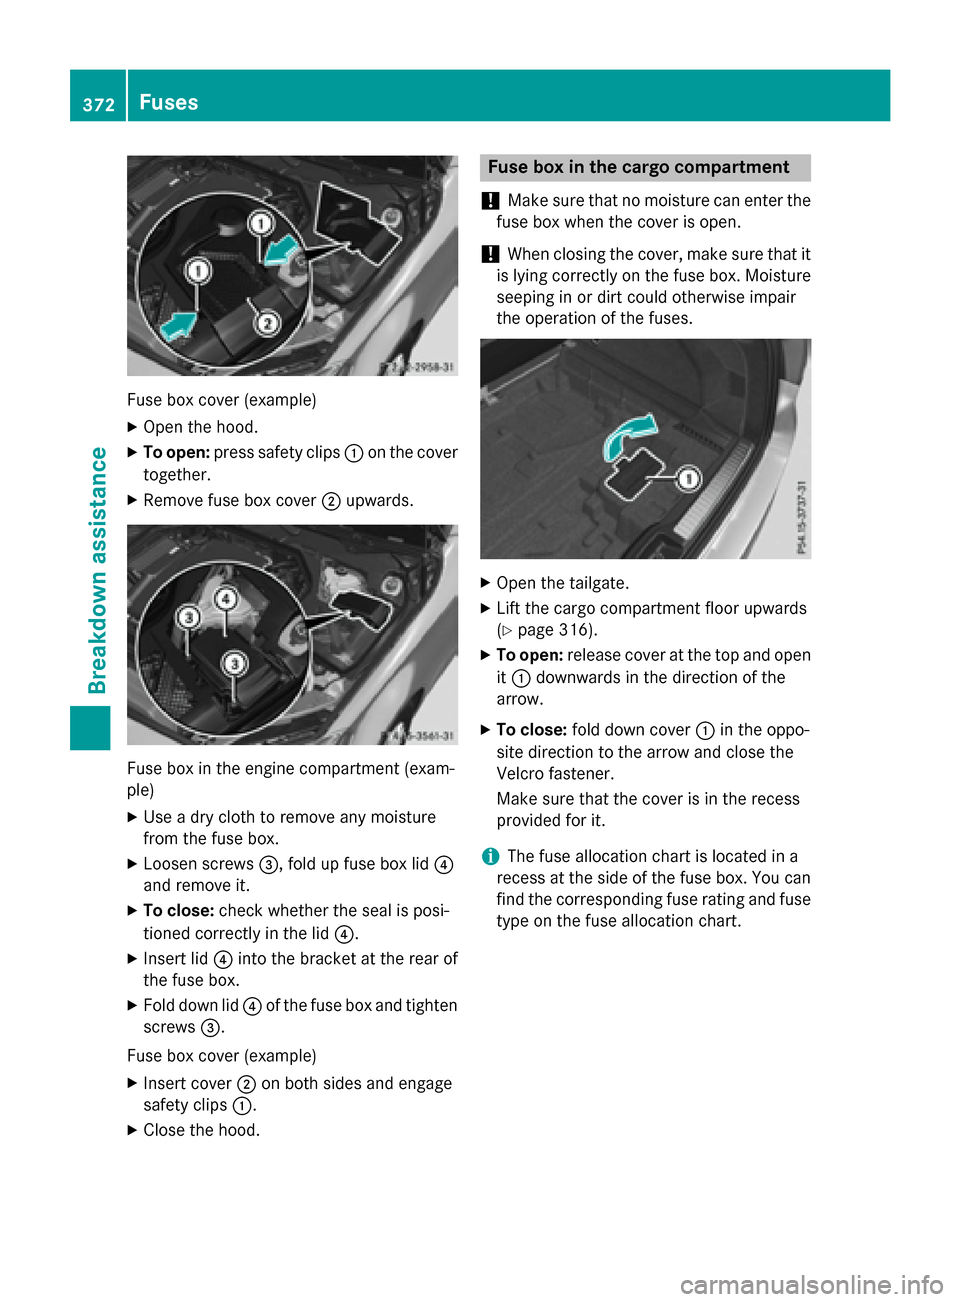 MERCEDES-BENZ GLC-Class 2016 X253 User Guide Fuse box cover (example)
XOpen the hood.
XTo open:press safety clips :on the cover
together.
XRemove fuse box cover ;upwards.
Fuse box in the engine compartment (exam-
ple)
XUse a dry cloth to remove 